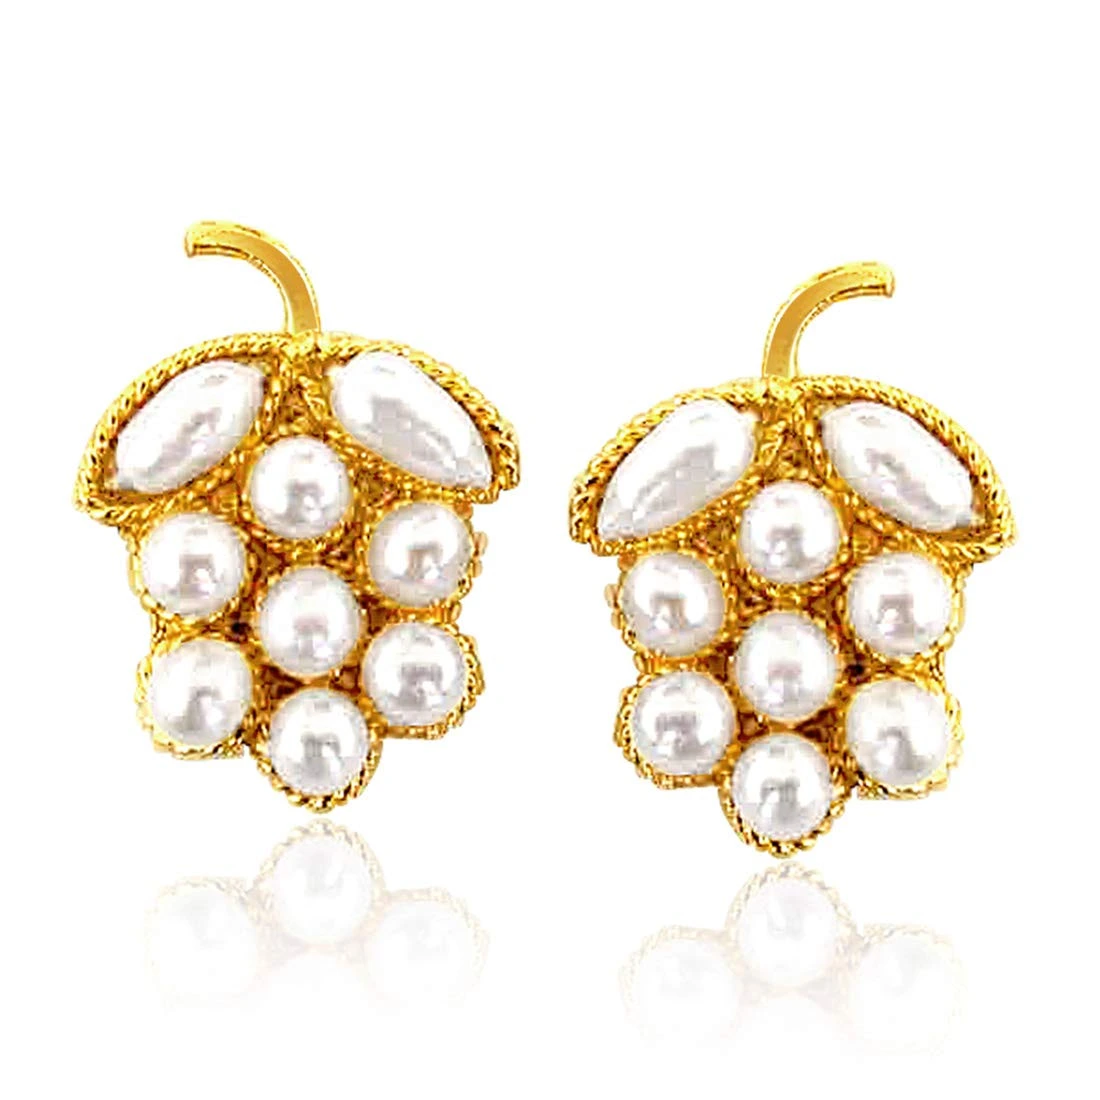 Lustrous Pearl Present - Real Freshwater Pearl & Gold Plated Grapes Shaped Earring for Women (SE42)